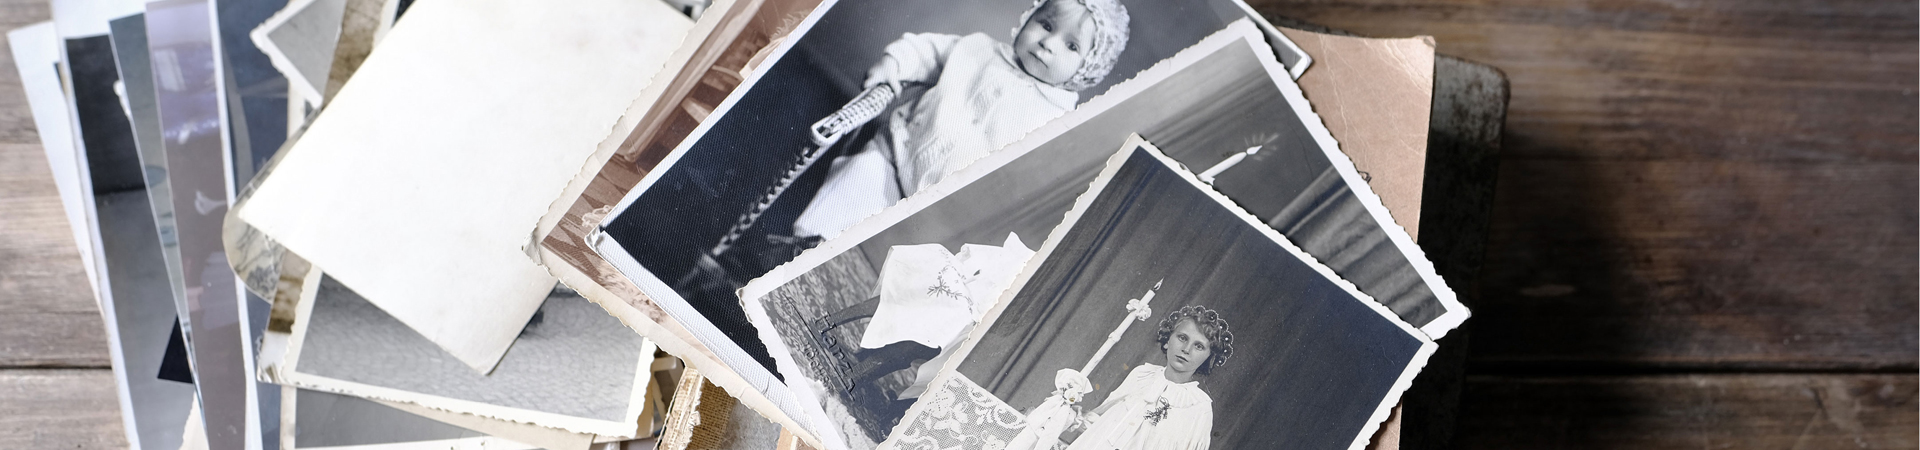 stack of many old photos spread on a table with two black and white photos of children taken about a century ago